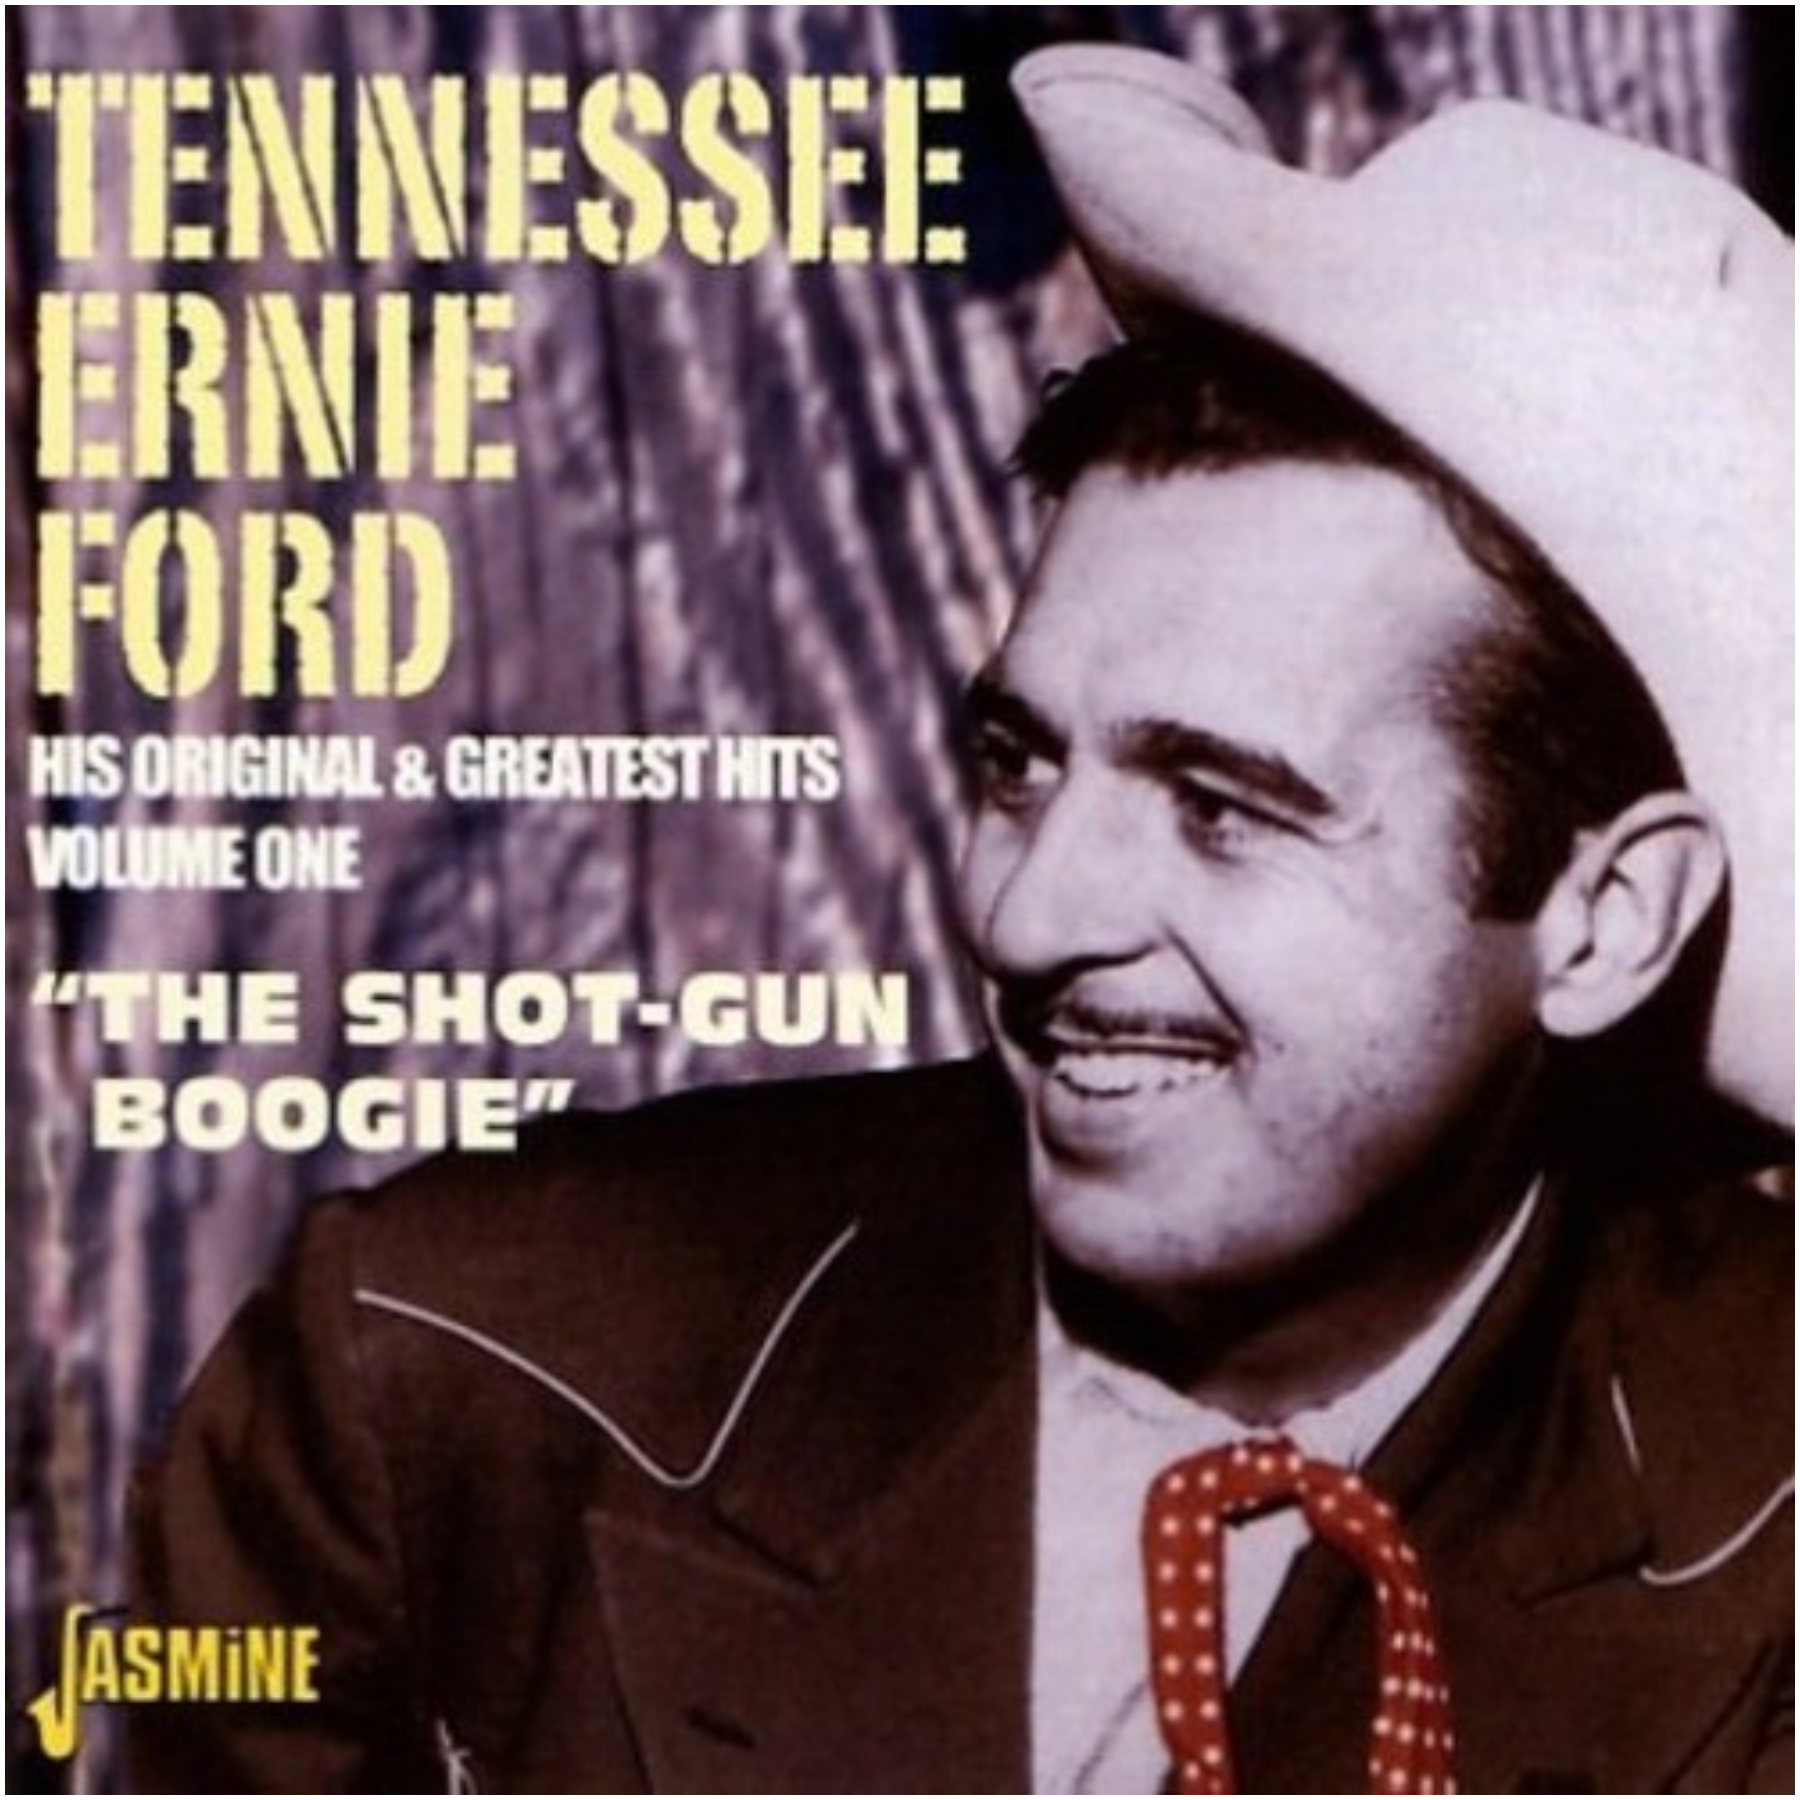 Ernie ford greatest hit tennessee #6